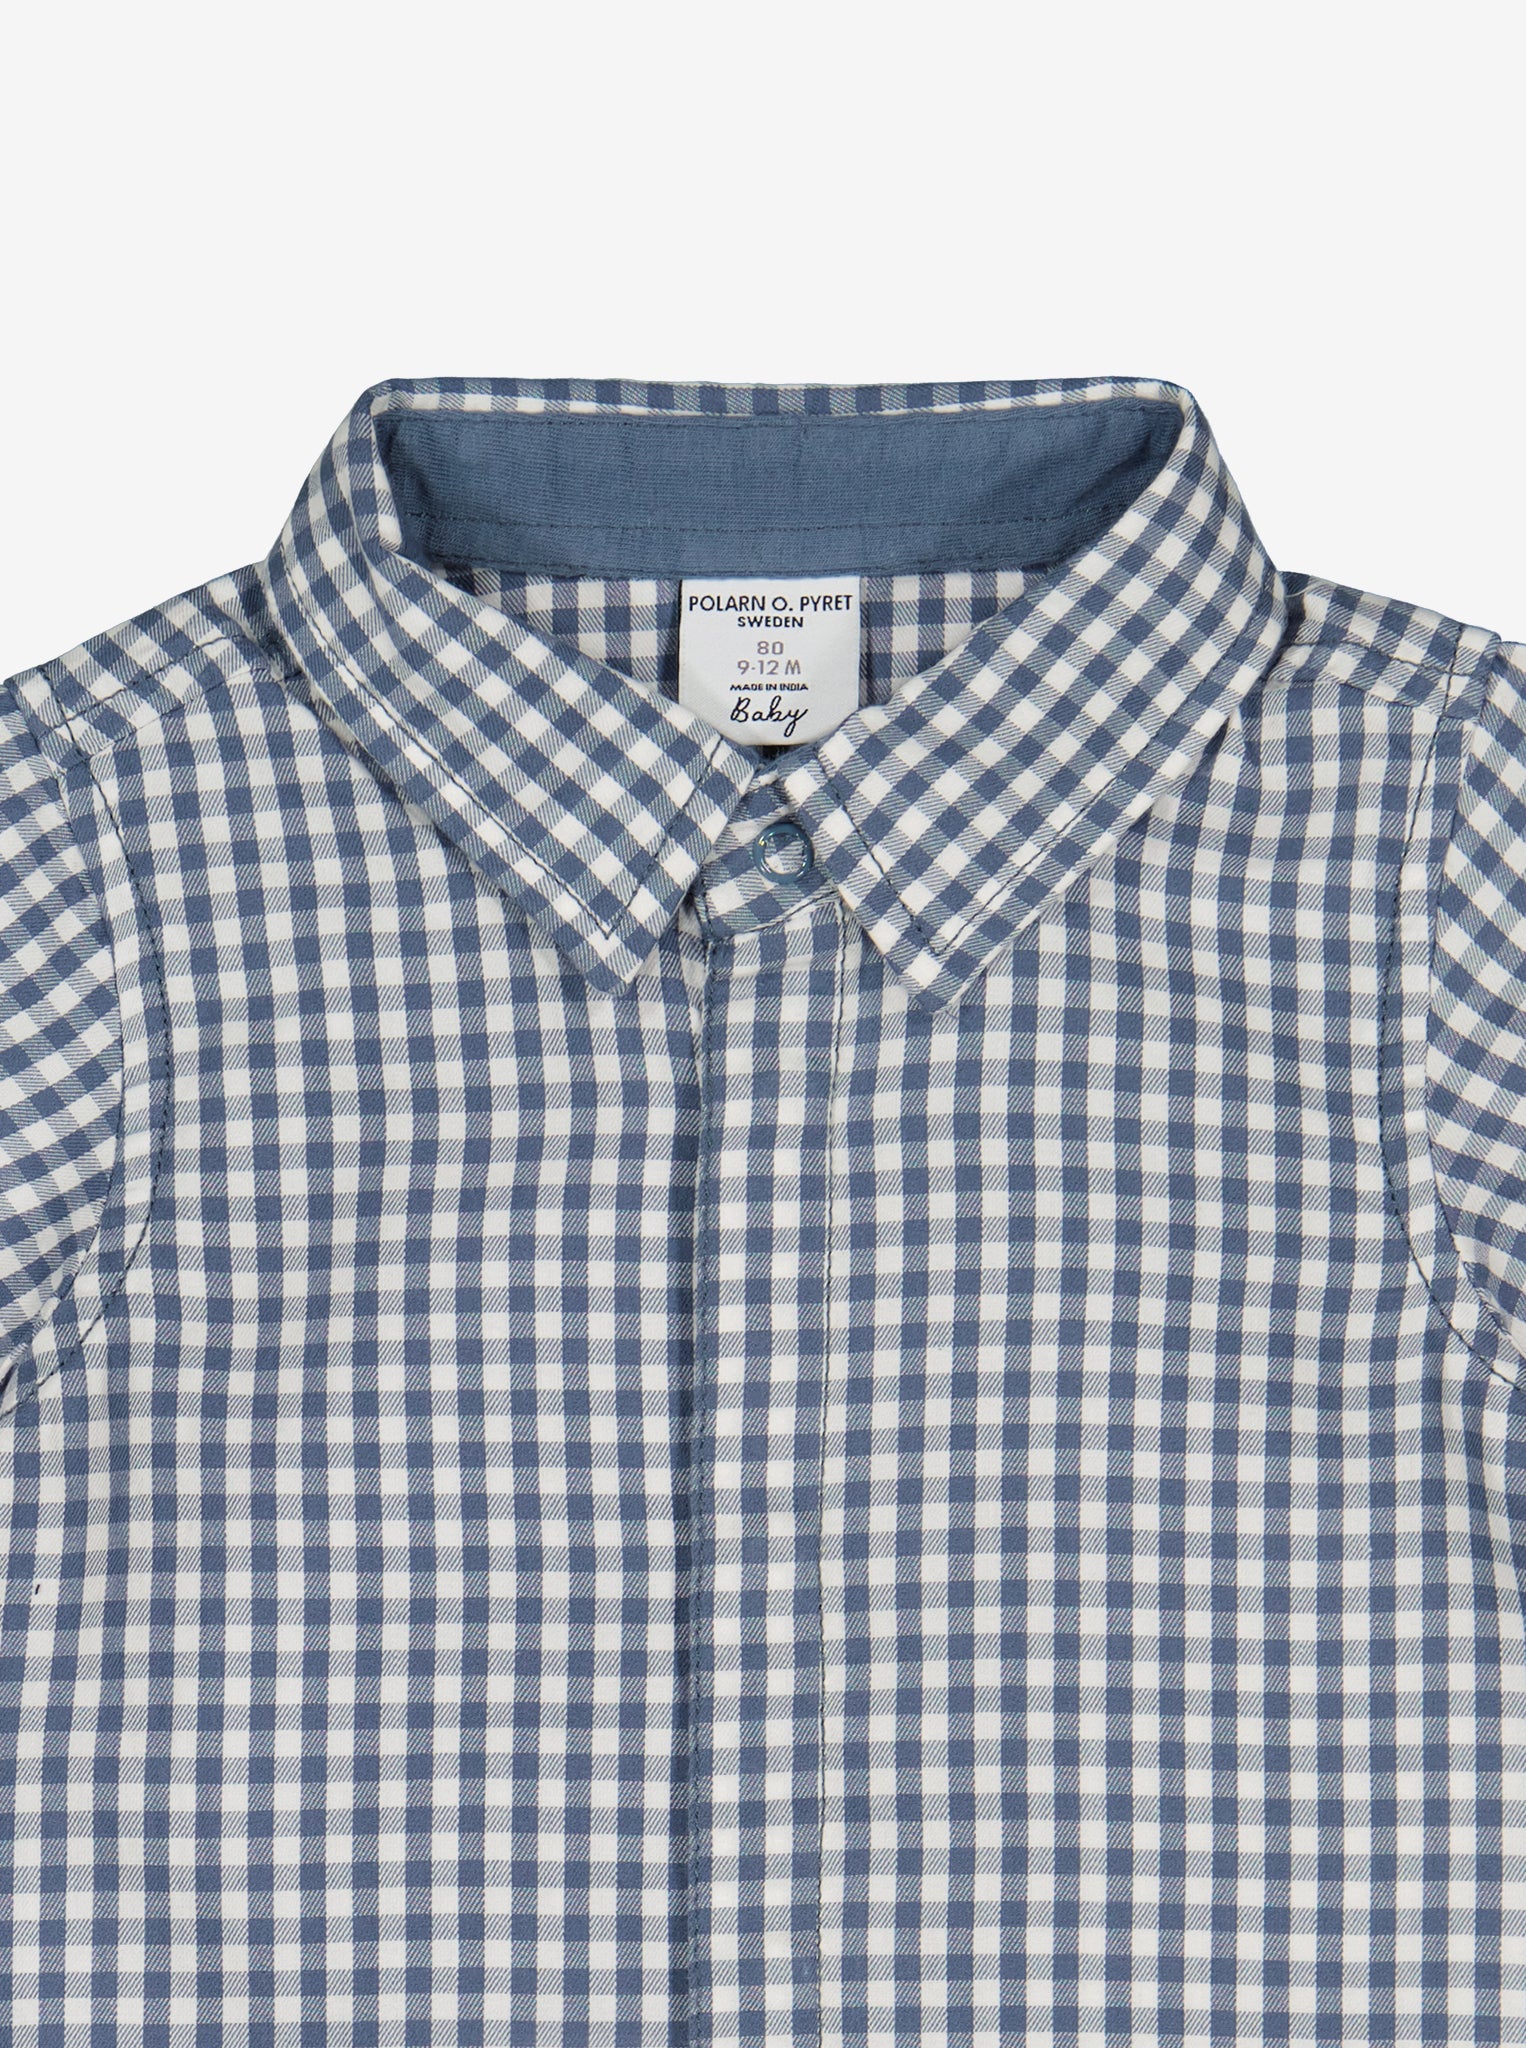 Blue Checked Newborn Baby Shirt from Polarn O. Pyret Kidswear. Made from 100% GOTS Organic Cotton.